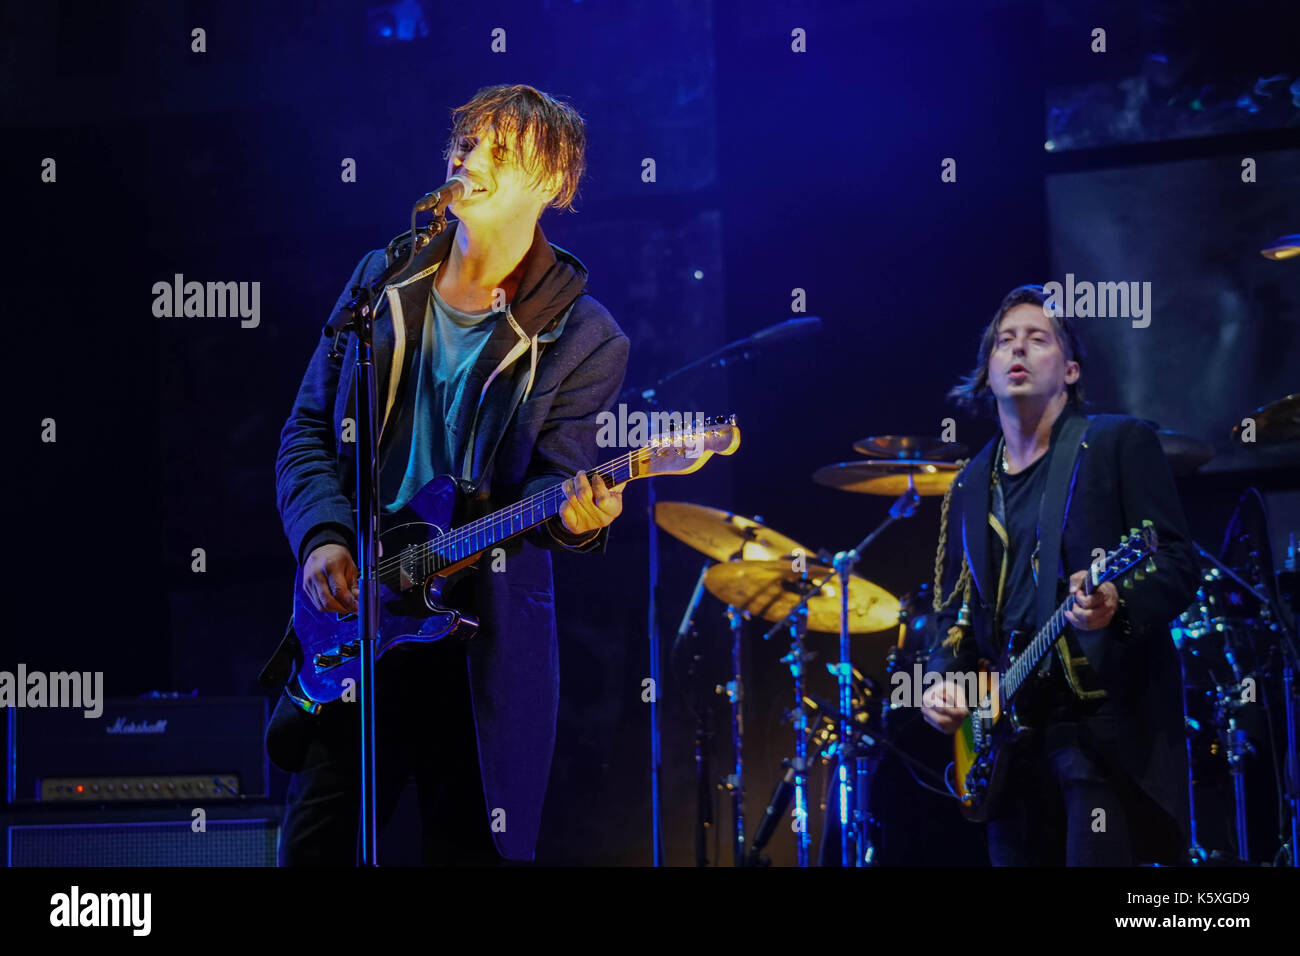 The Libertines performing live on the Main Stage at the 2017 OnBlackheath Festival in Blackheath, London. Photo date: Sunday, September 10, 2017. Photo credit should read: Roger Garfield/Alamy Stock Photo